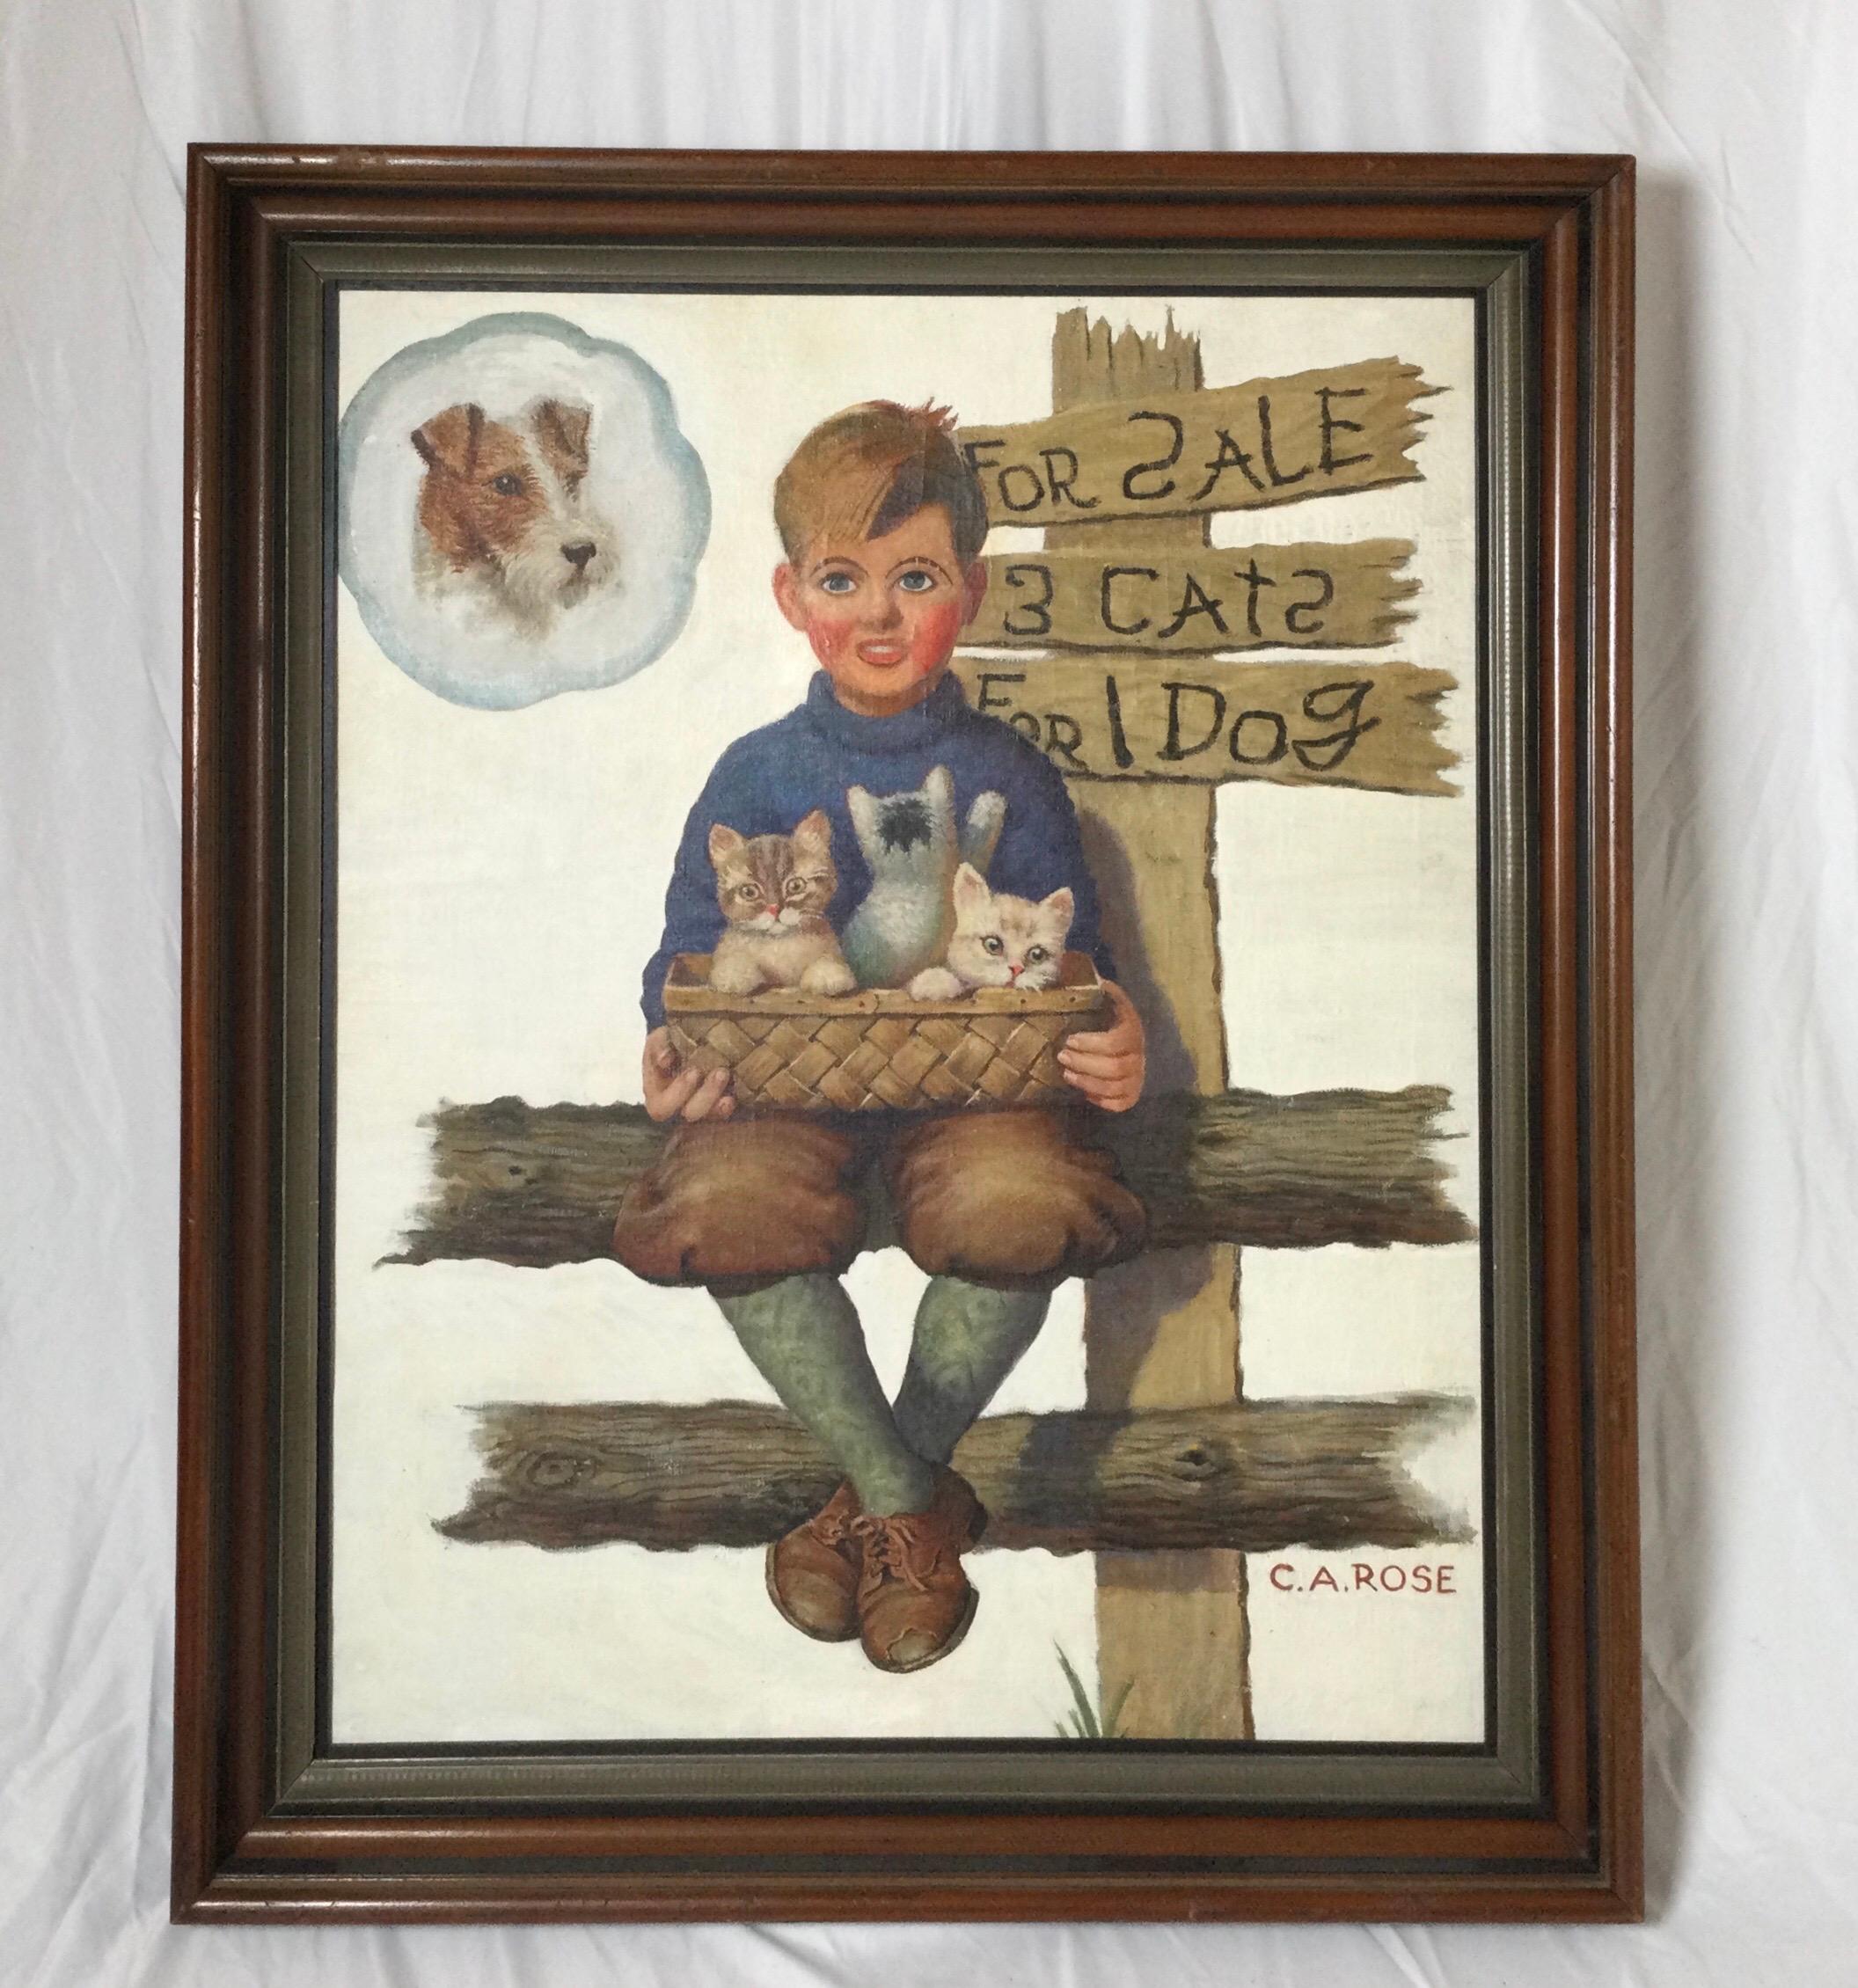 Original oil painting illustration, boy with kittens, 1920-30 by C. A. Rose, an illustrator and cartoonist for the saturday evening post. Measures: Framed 34 high, 28 wide, the sight size is 30 high, 24 wide.